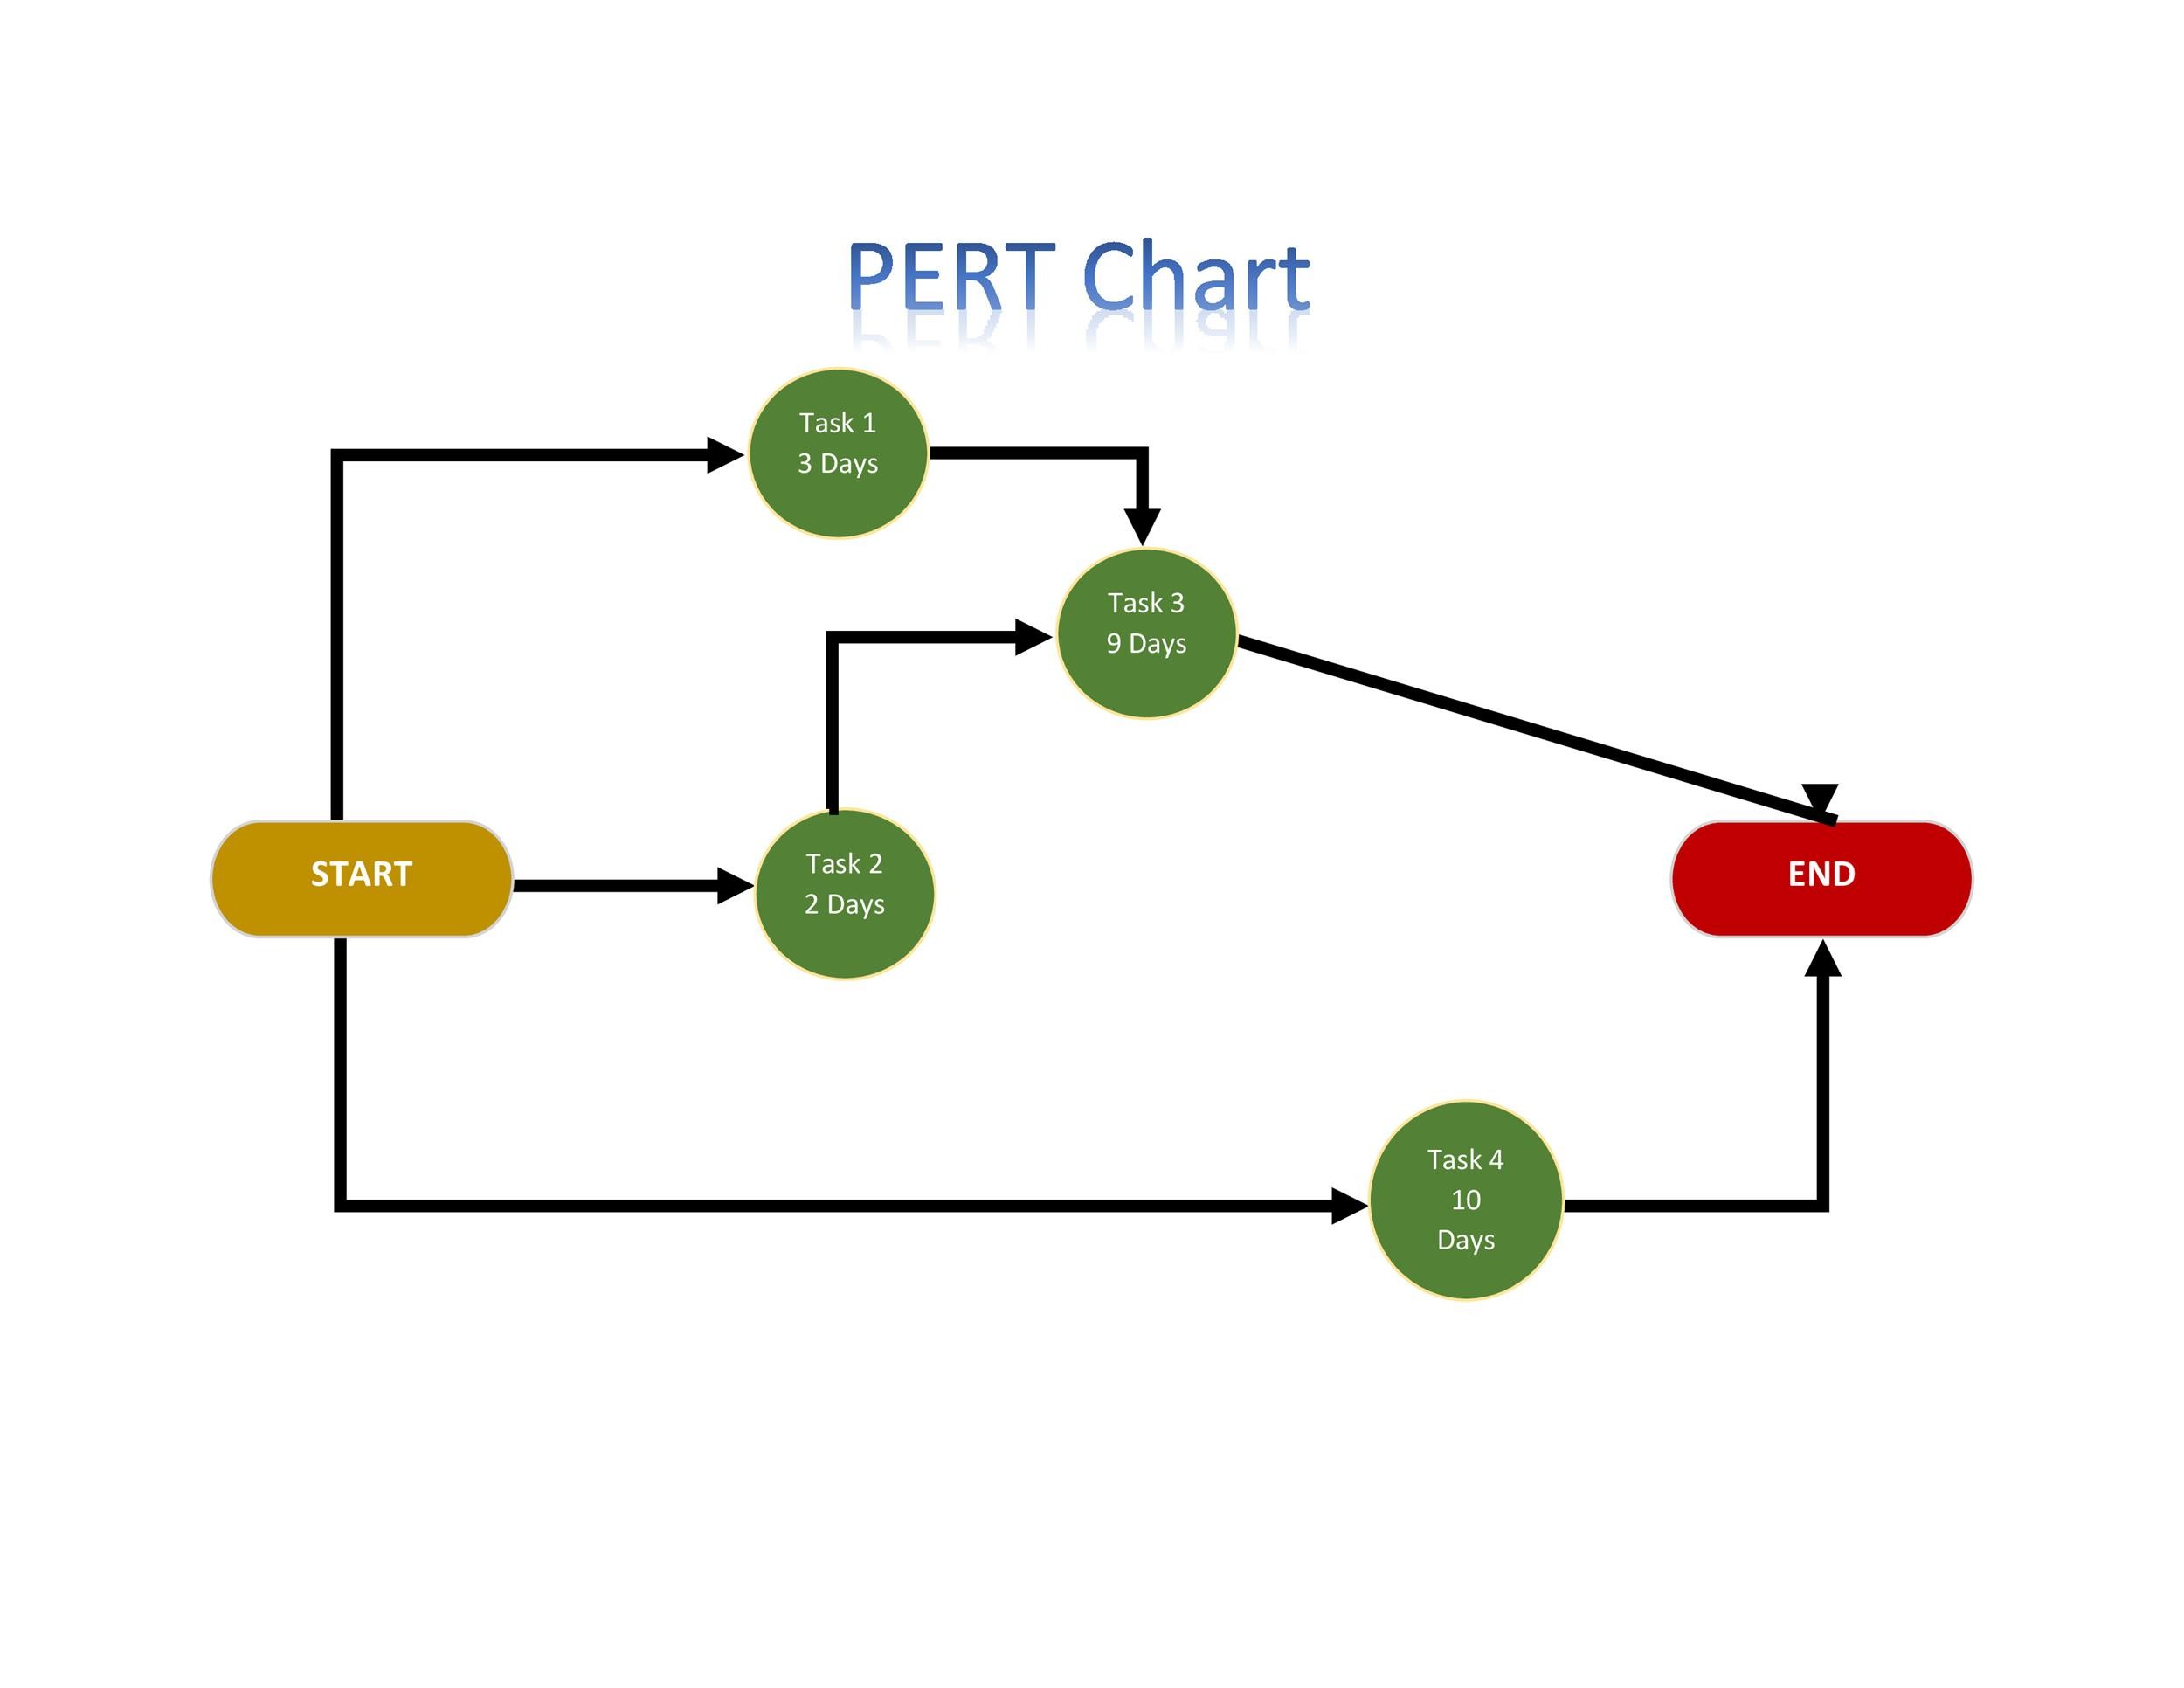 What Is Pert Chart Used For